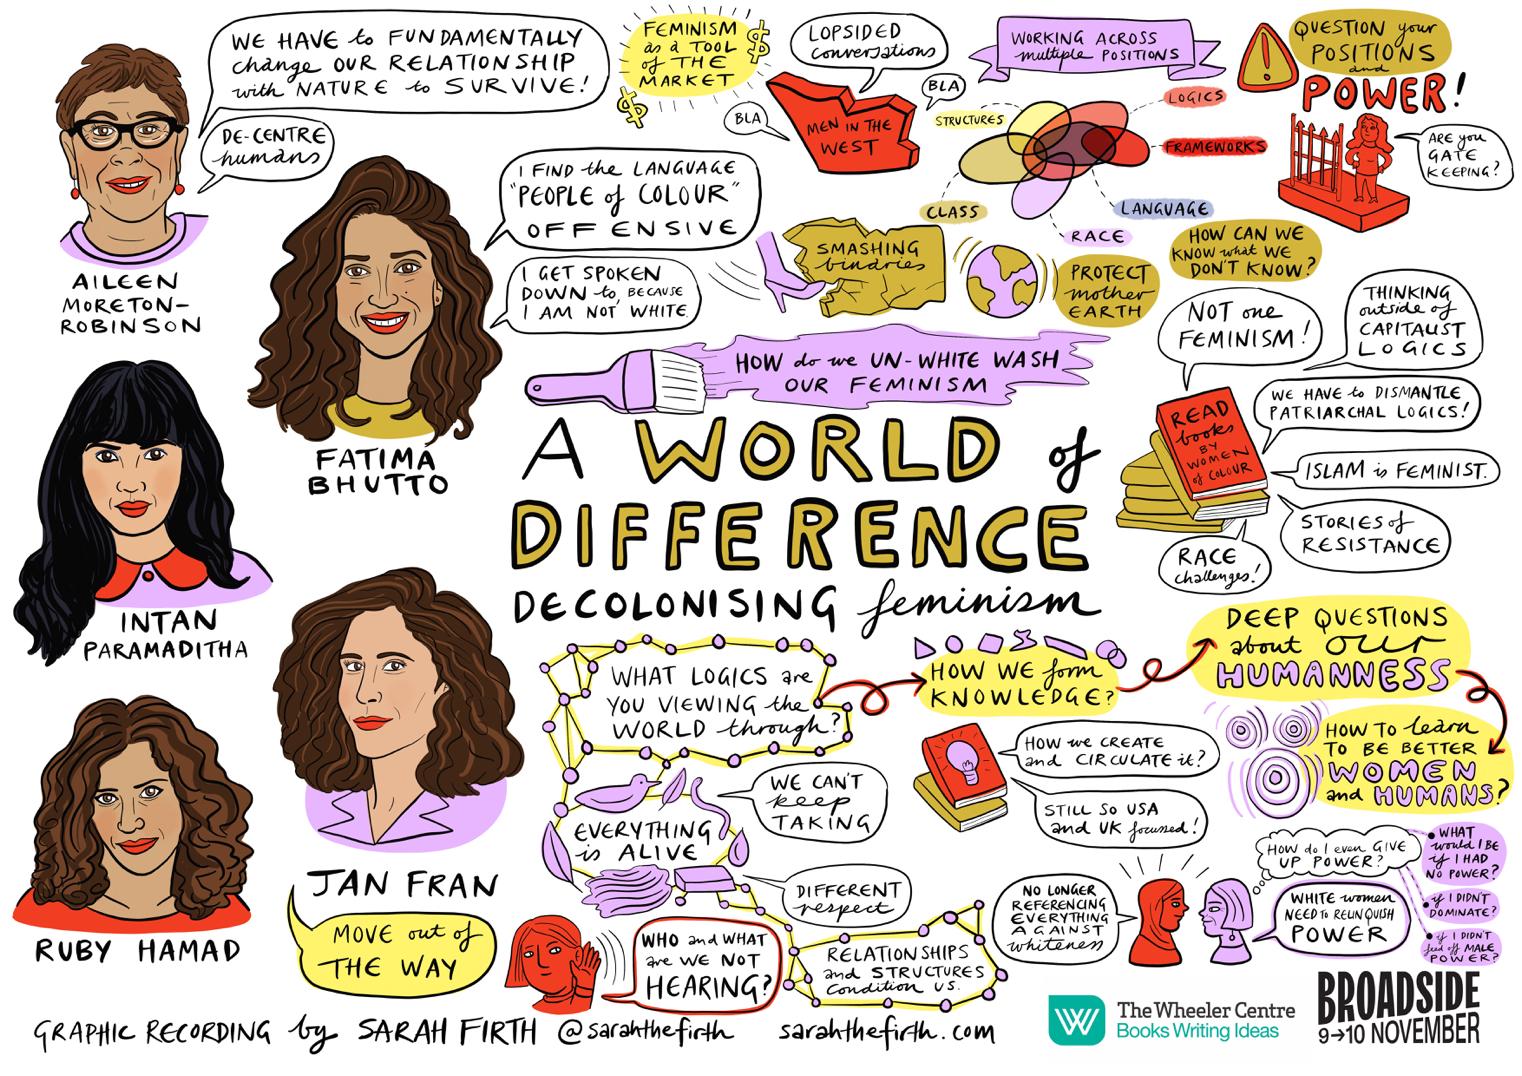 graphic recording of A World Of Difference: Decolonising Feminism panel